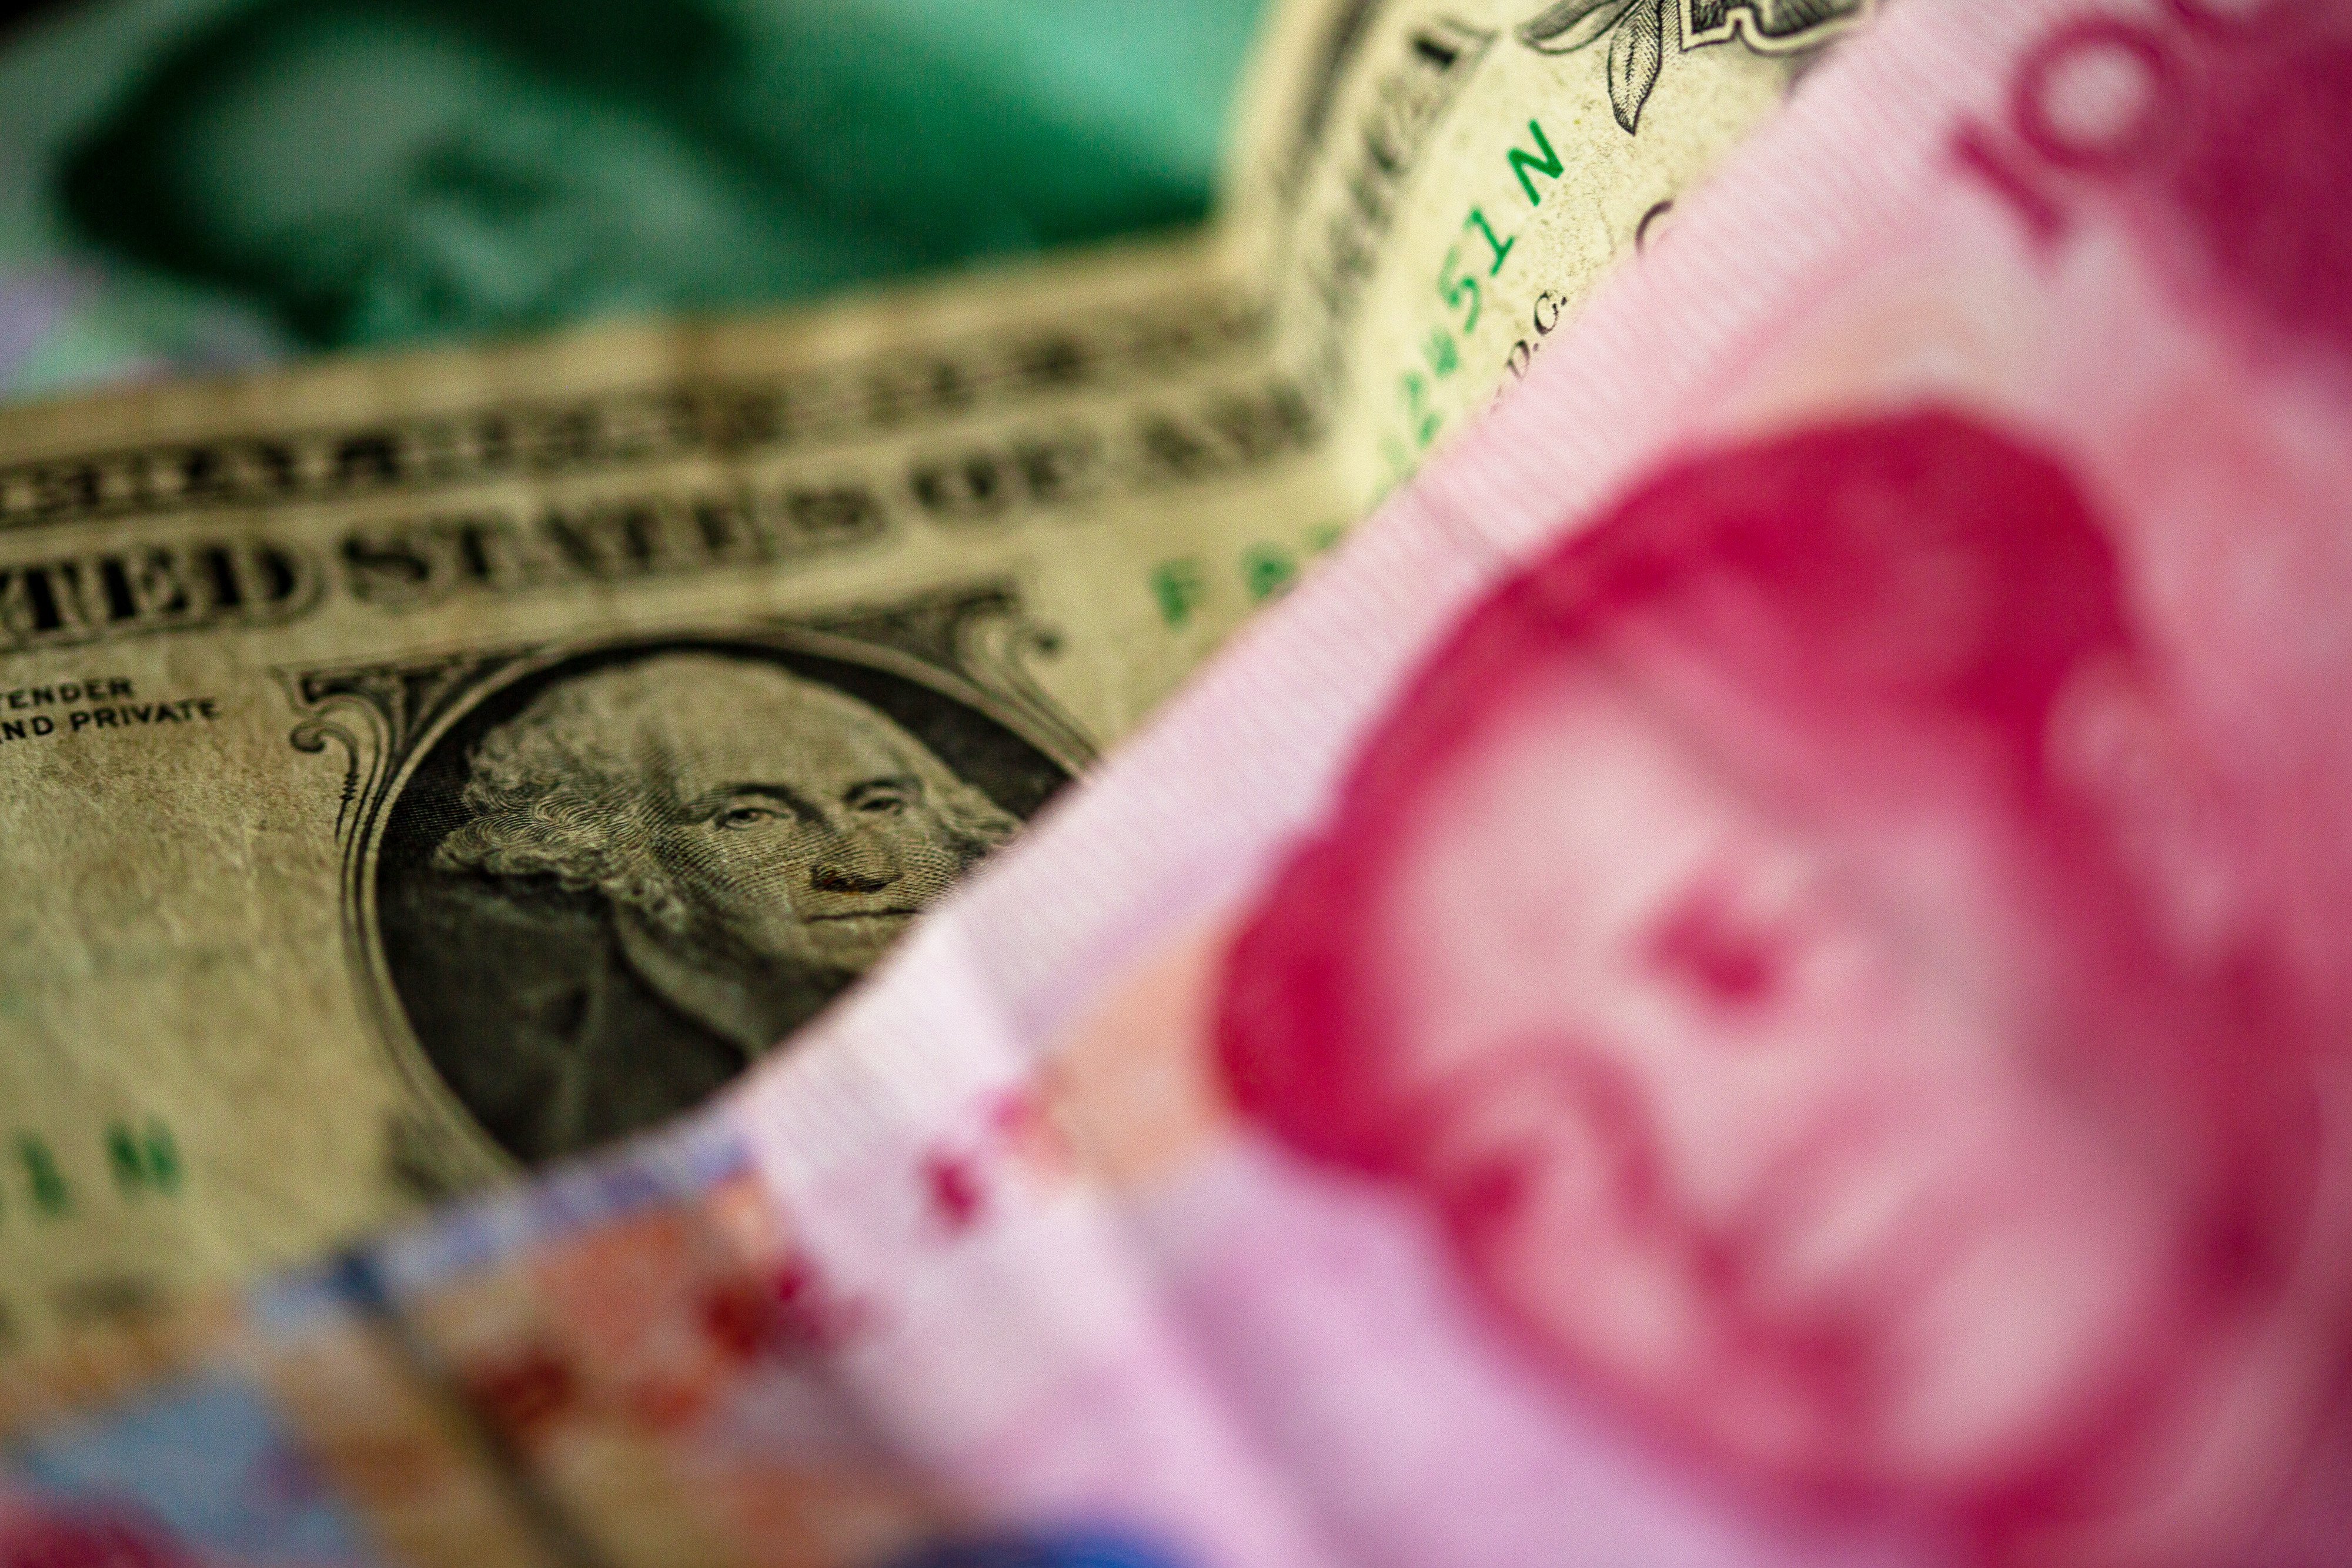 If the US Federal Reserve cuts interest rates next year, it could reduce pressure on the yuan and result in a greater inflow of capital to China. Photo: dpa